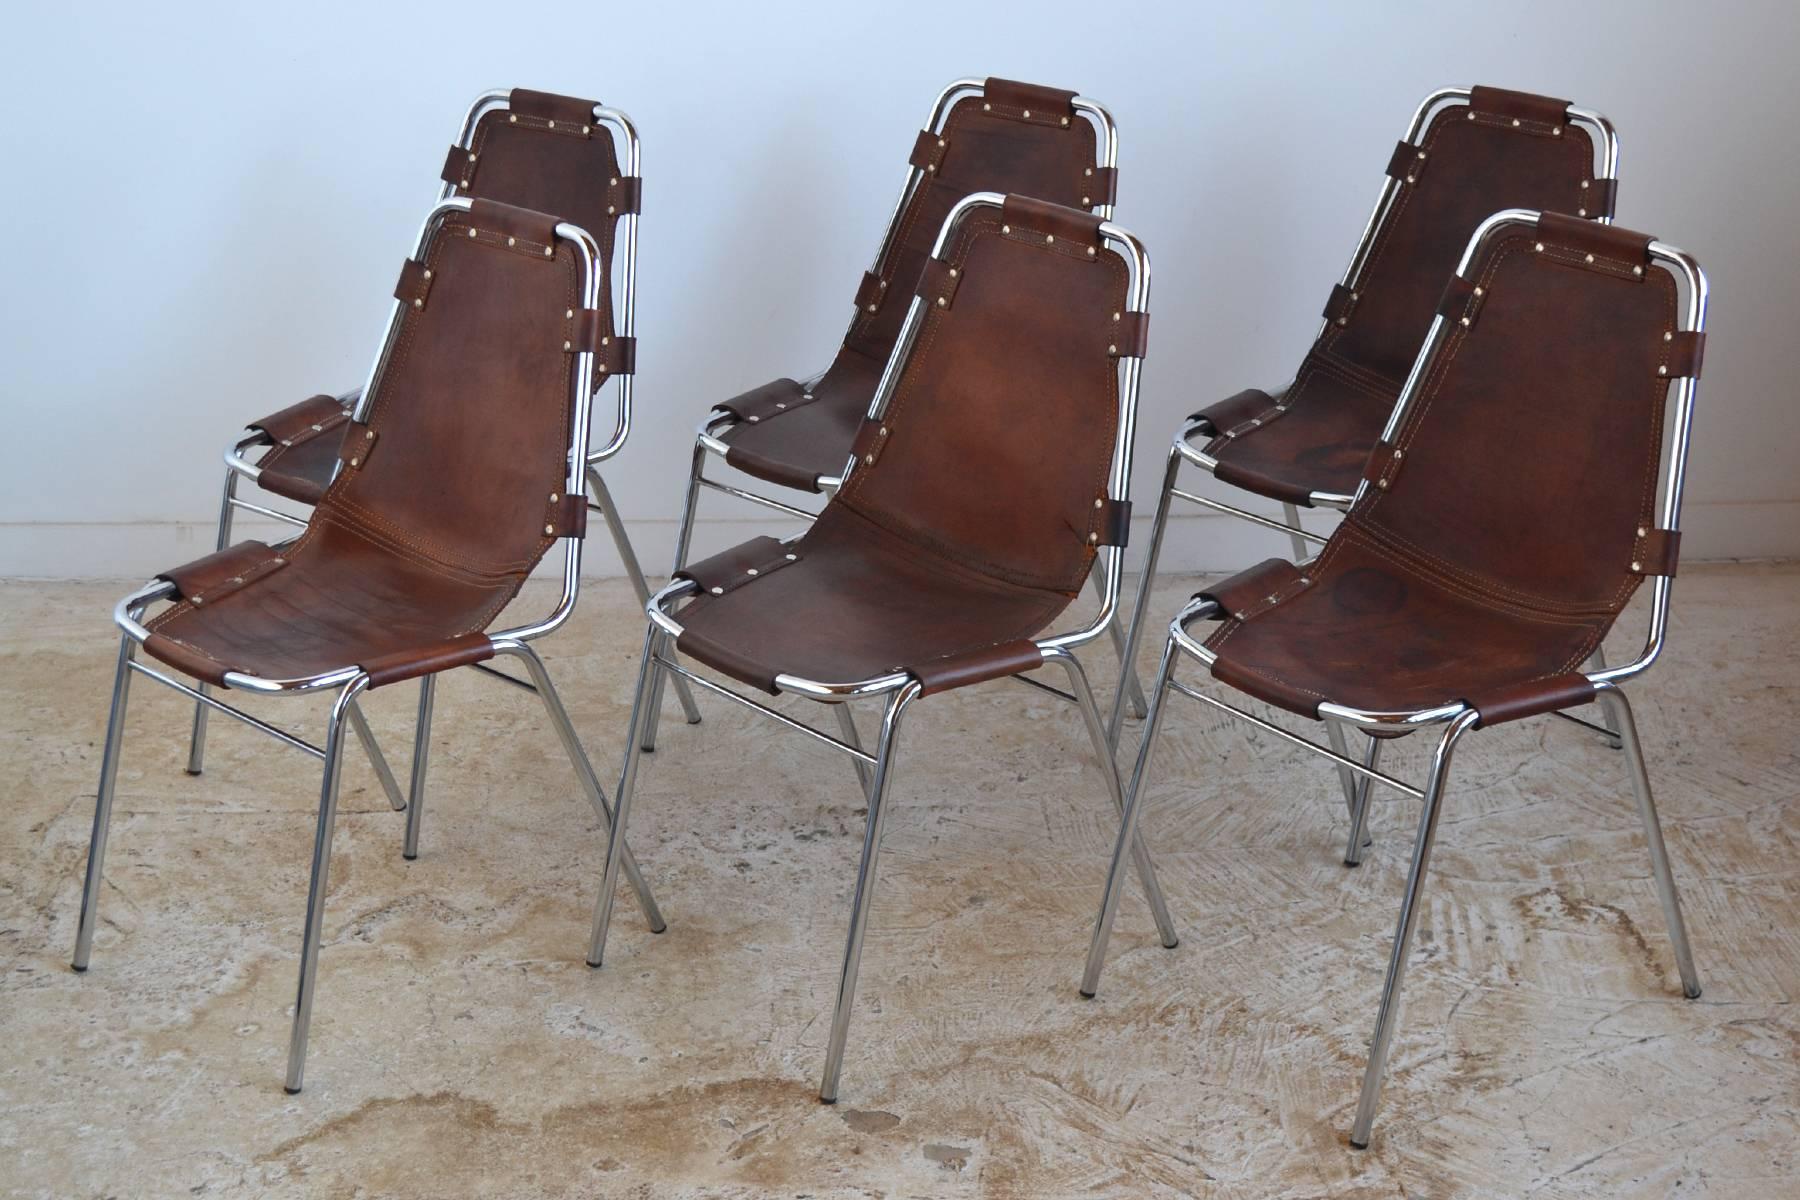 Specified for Charlotte Perriand's Les Arcs ski resort, these stacking chairs feature a chromed steel frame with a leather sling seat. The leather has acquired a beautiful patina from years of age and use.